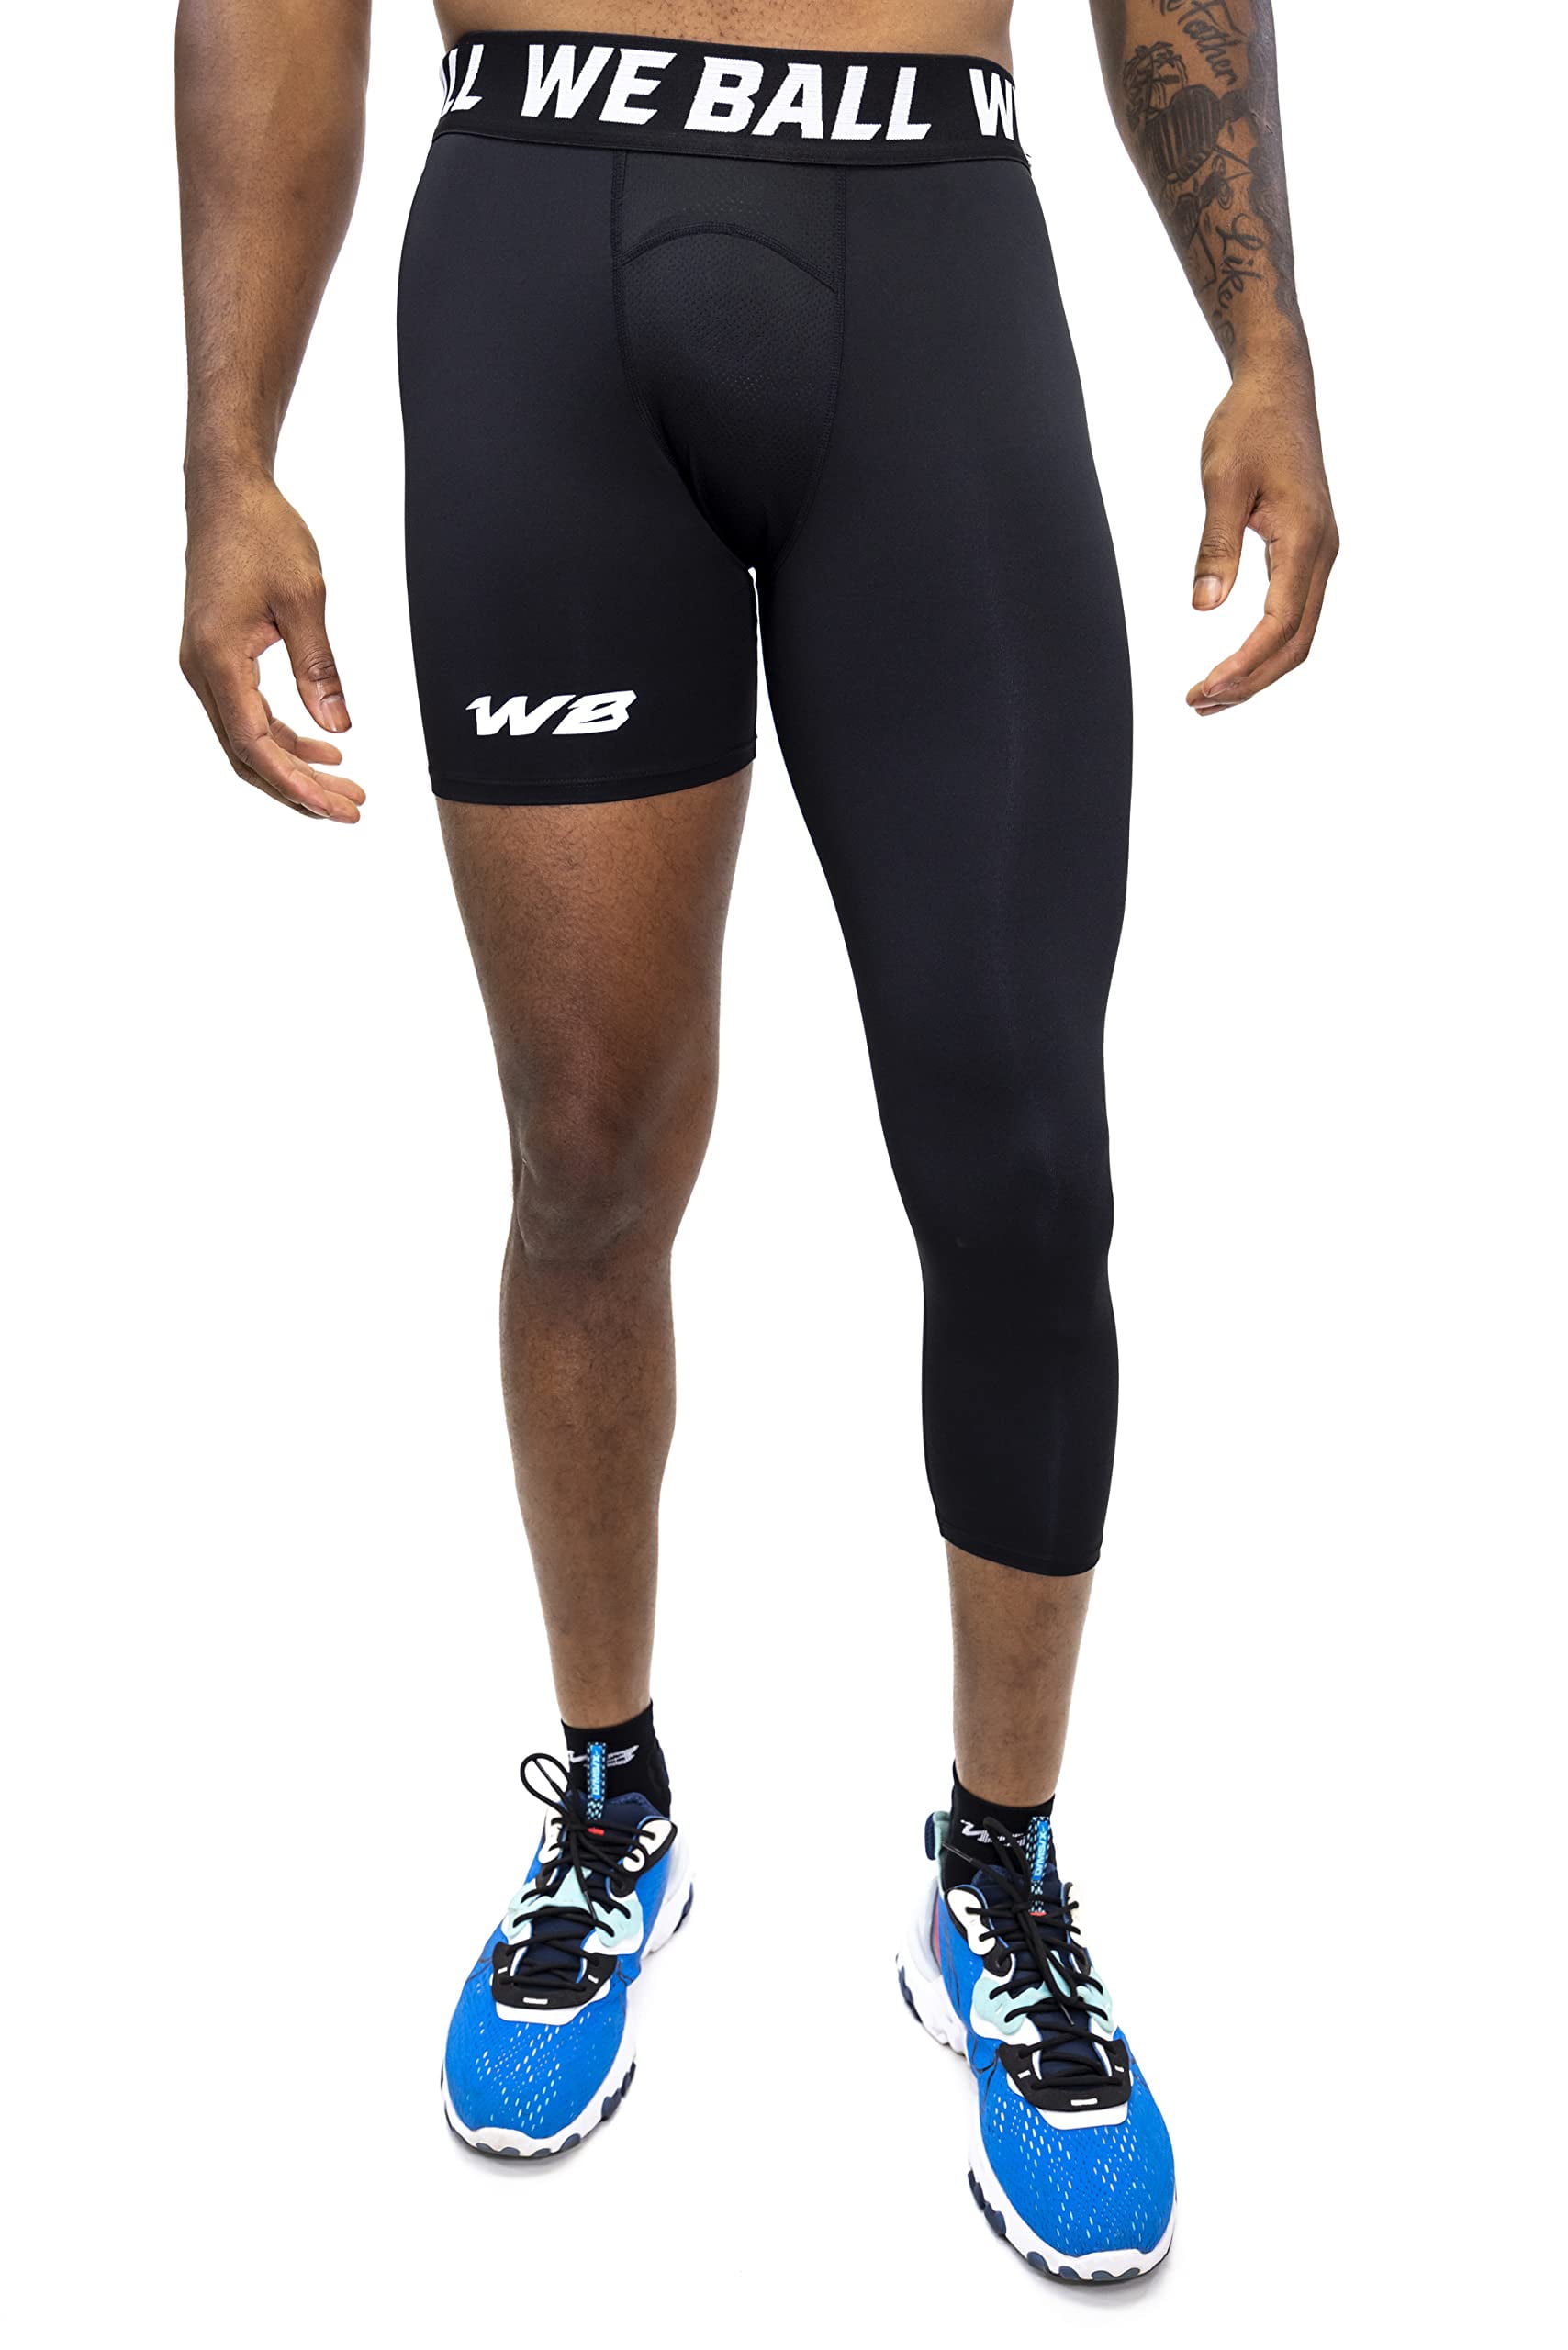  Men's Basketball Single Leg Tight Sports Pants 3/4 One Leg  Compression Pants Athletic Base Layer Underwear(Black,Small) : Clothing,  Shoes & Jewelry